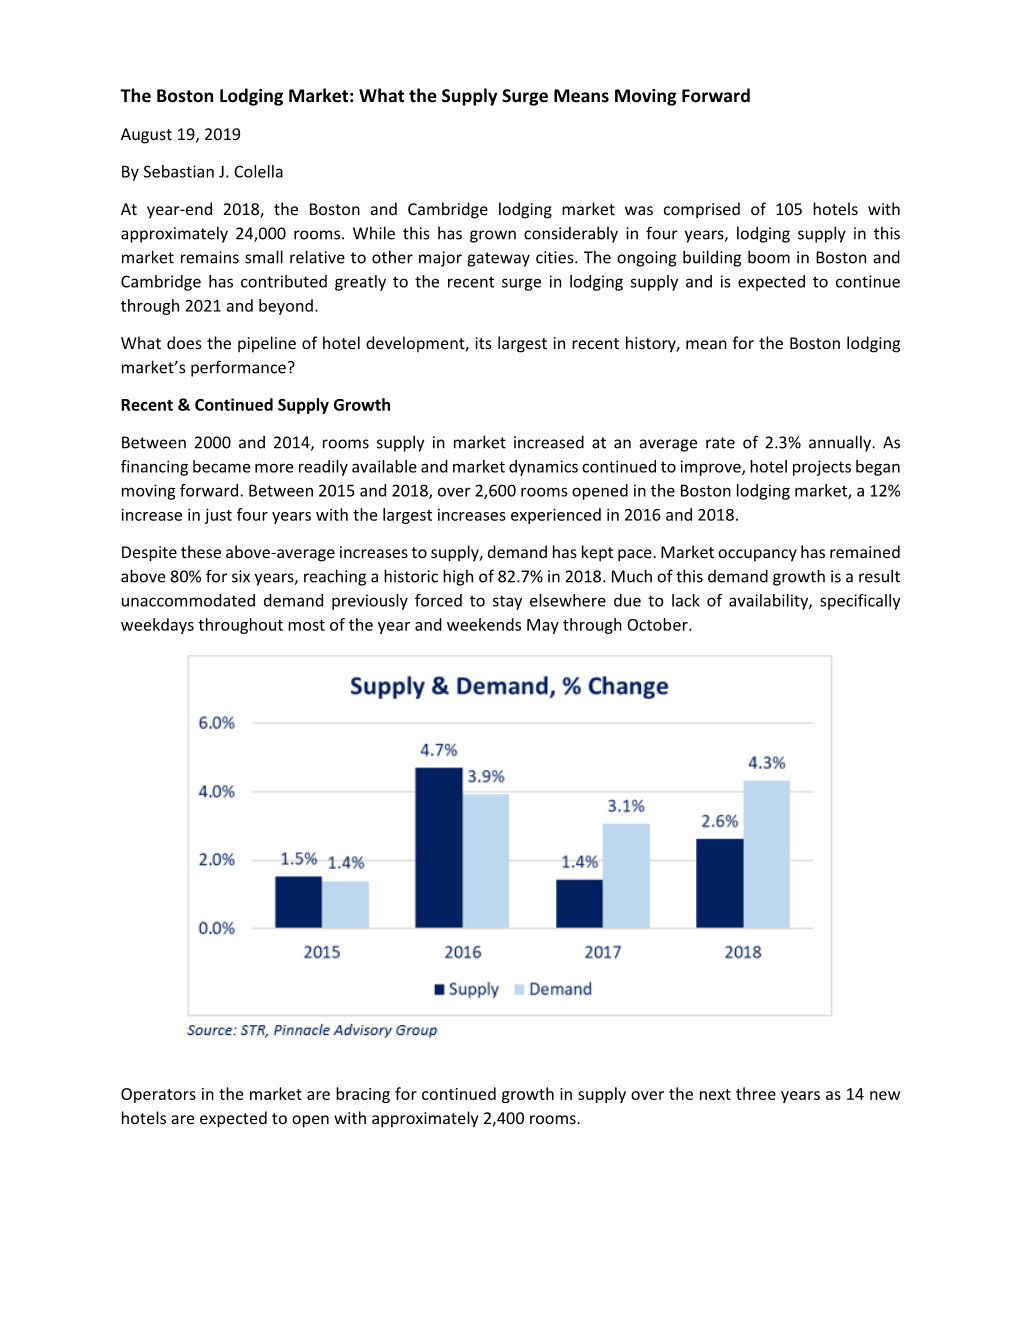 The Boston Lodging Market: What the Supply Surge Means Moving Forward August 19, 2019